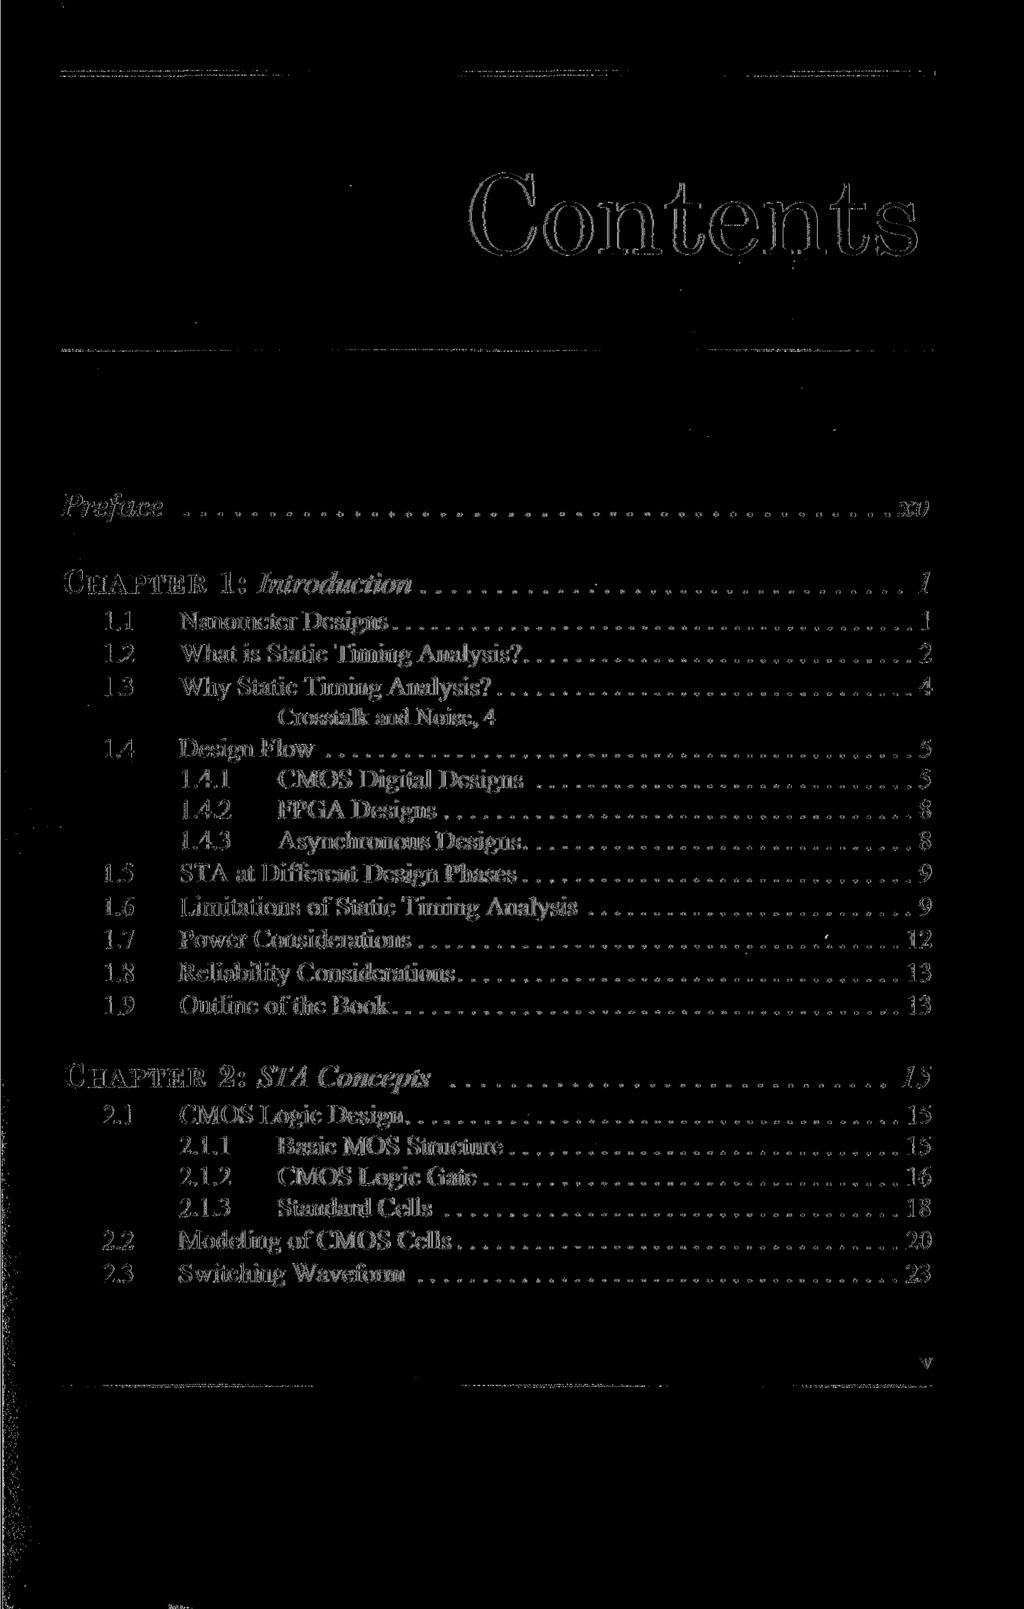 Contents Preface xv CHAPTER 1: Introduction / 1.1 Nanometer Designs 1 1.2 What is Static Timing Analysis? 2 1.3 Why Static Timing Analysis? 4 Crosstalk and Noise, 4 1.4 Design Flow 5 1.4.1 CMOS Digital Designs 5 1.